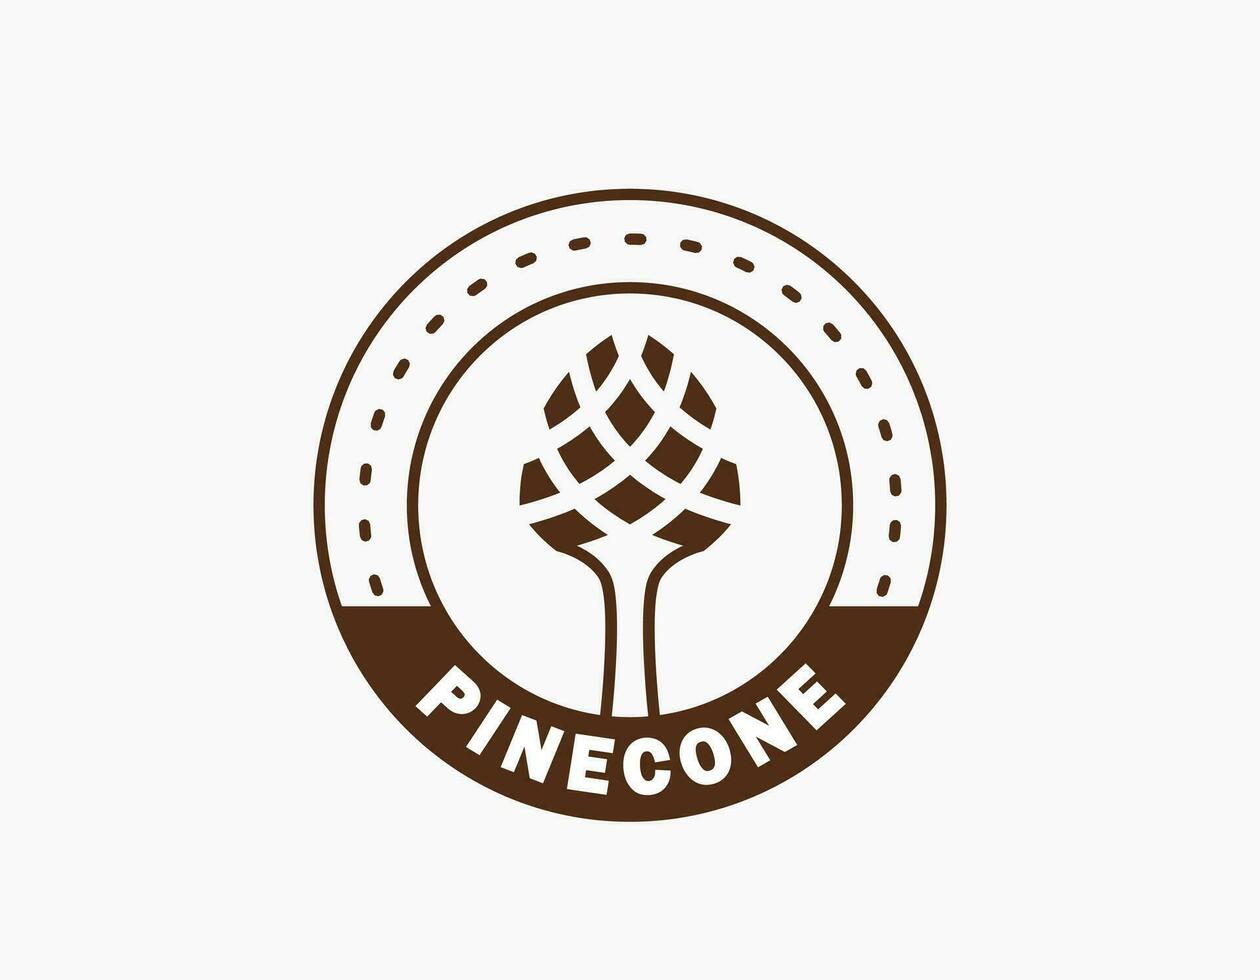 Pinecone logo icon. Simple circular icon of pinecone or torch. Rustic retro vintage design with brown. Elegant icon for badge, label, emblem, stamp. vector